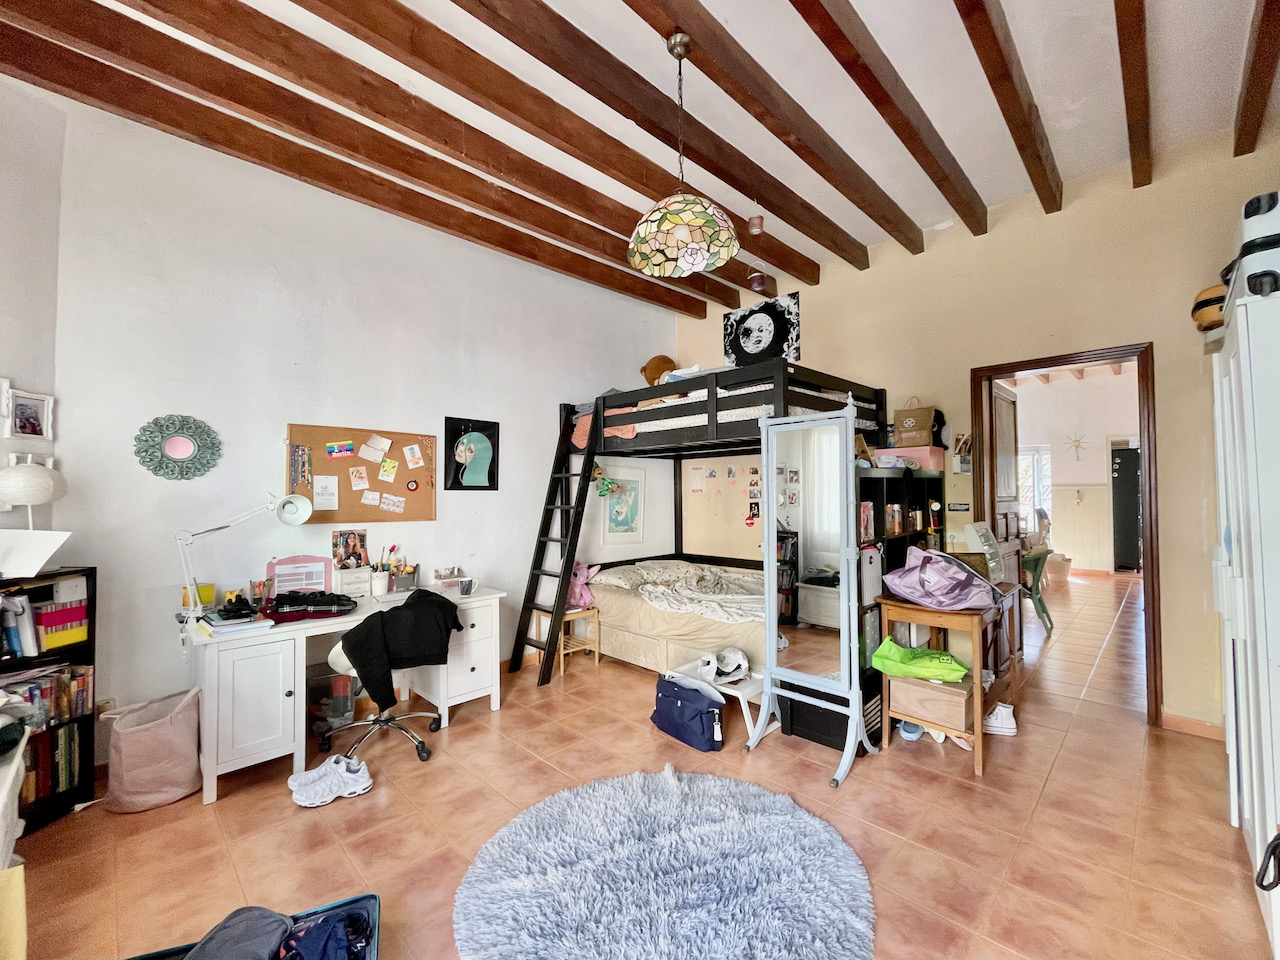 Spacious and bright flat in Caro street, modern rustic style.